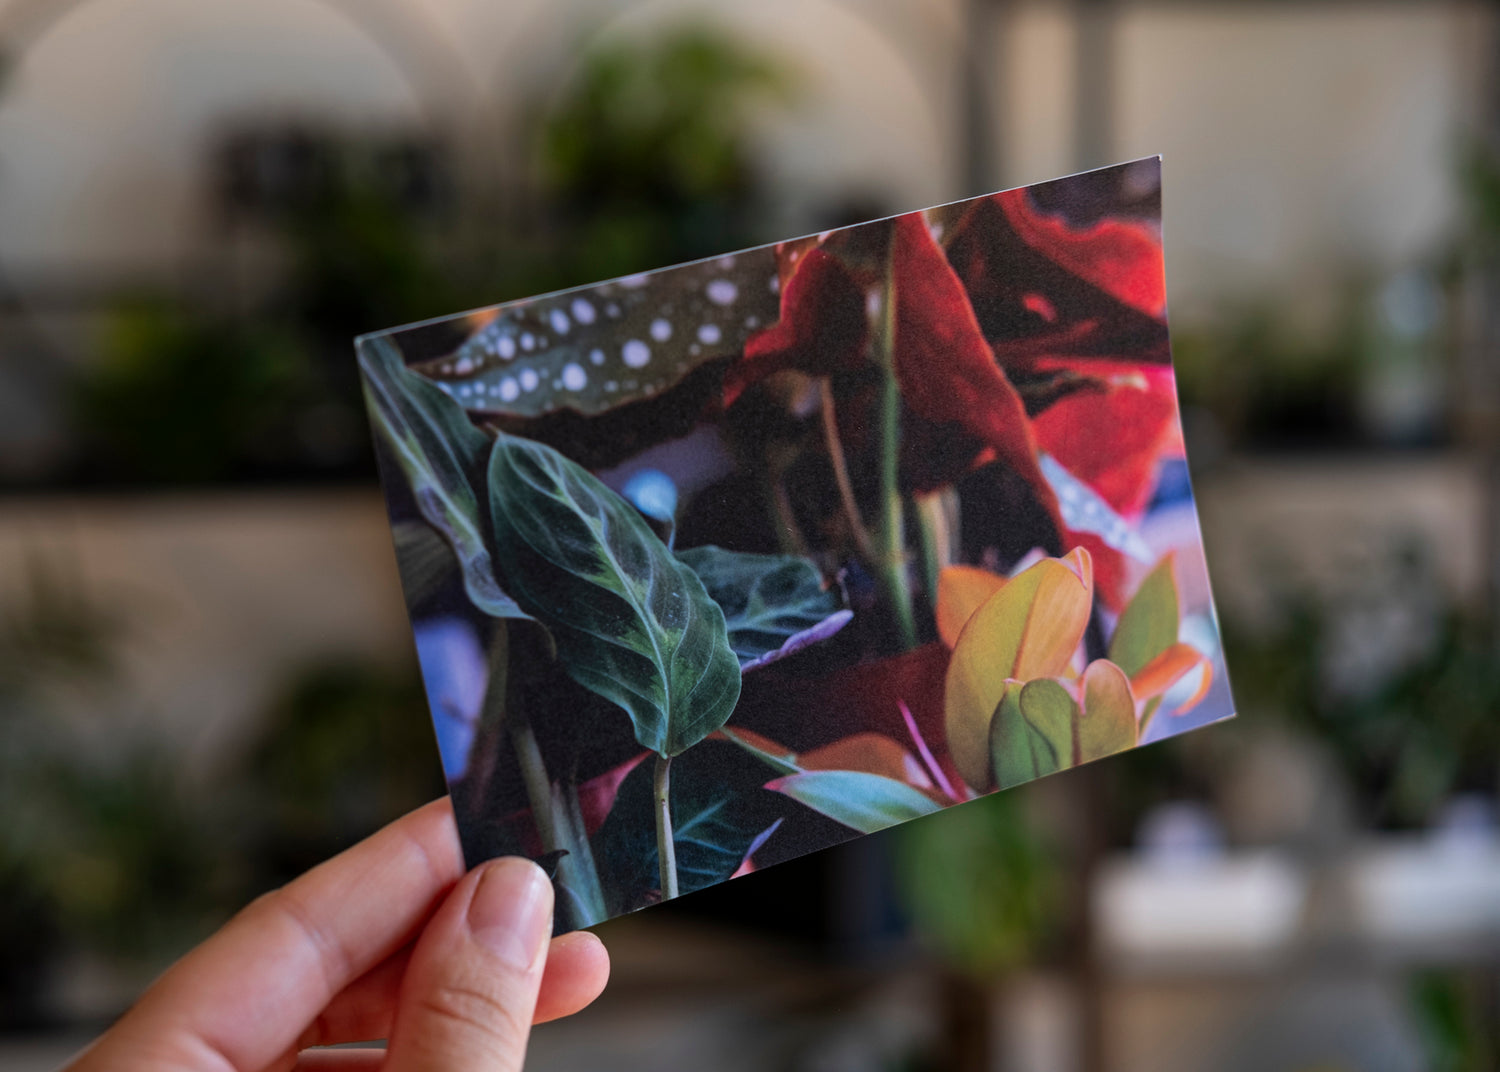 Plant postcard containing calatheas, philodendrons, and begonias